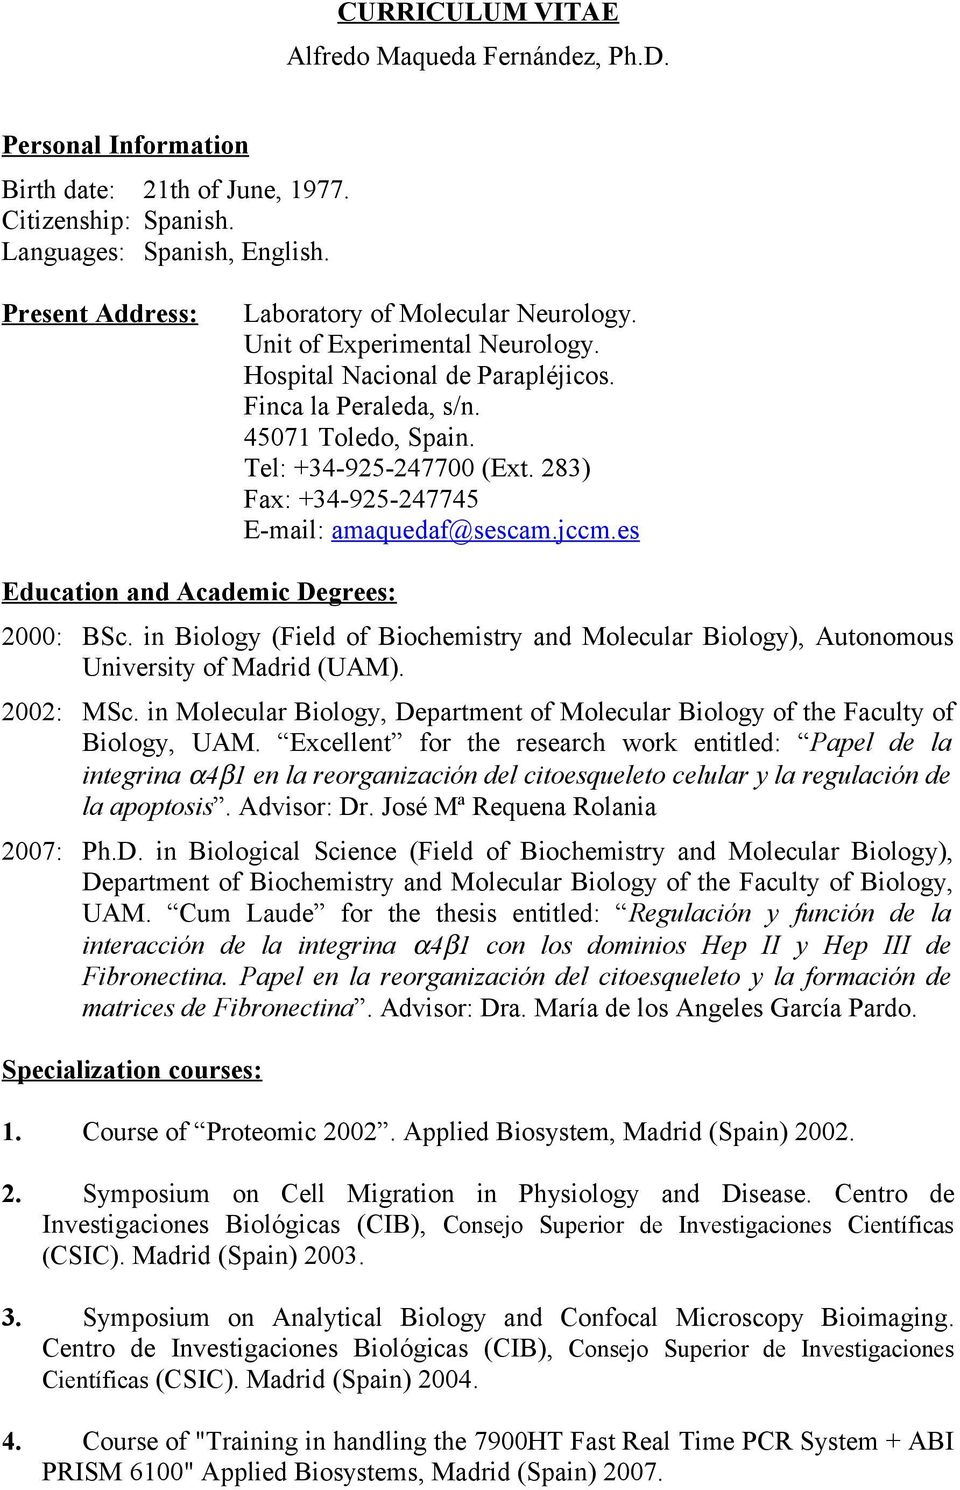 283) Fax: +34-925-247745 E-mail: amaquedaf@sescam.jccm.es Education and Academic Degrees: 2000: BSc. in Biology (Field of Biochemistry and Molecular Biology), Autonomous University of Madrid (UAM).